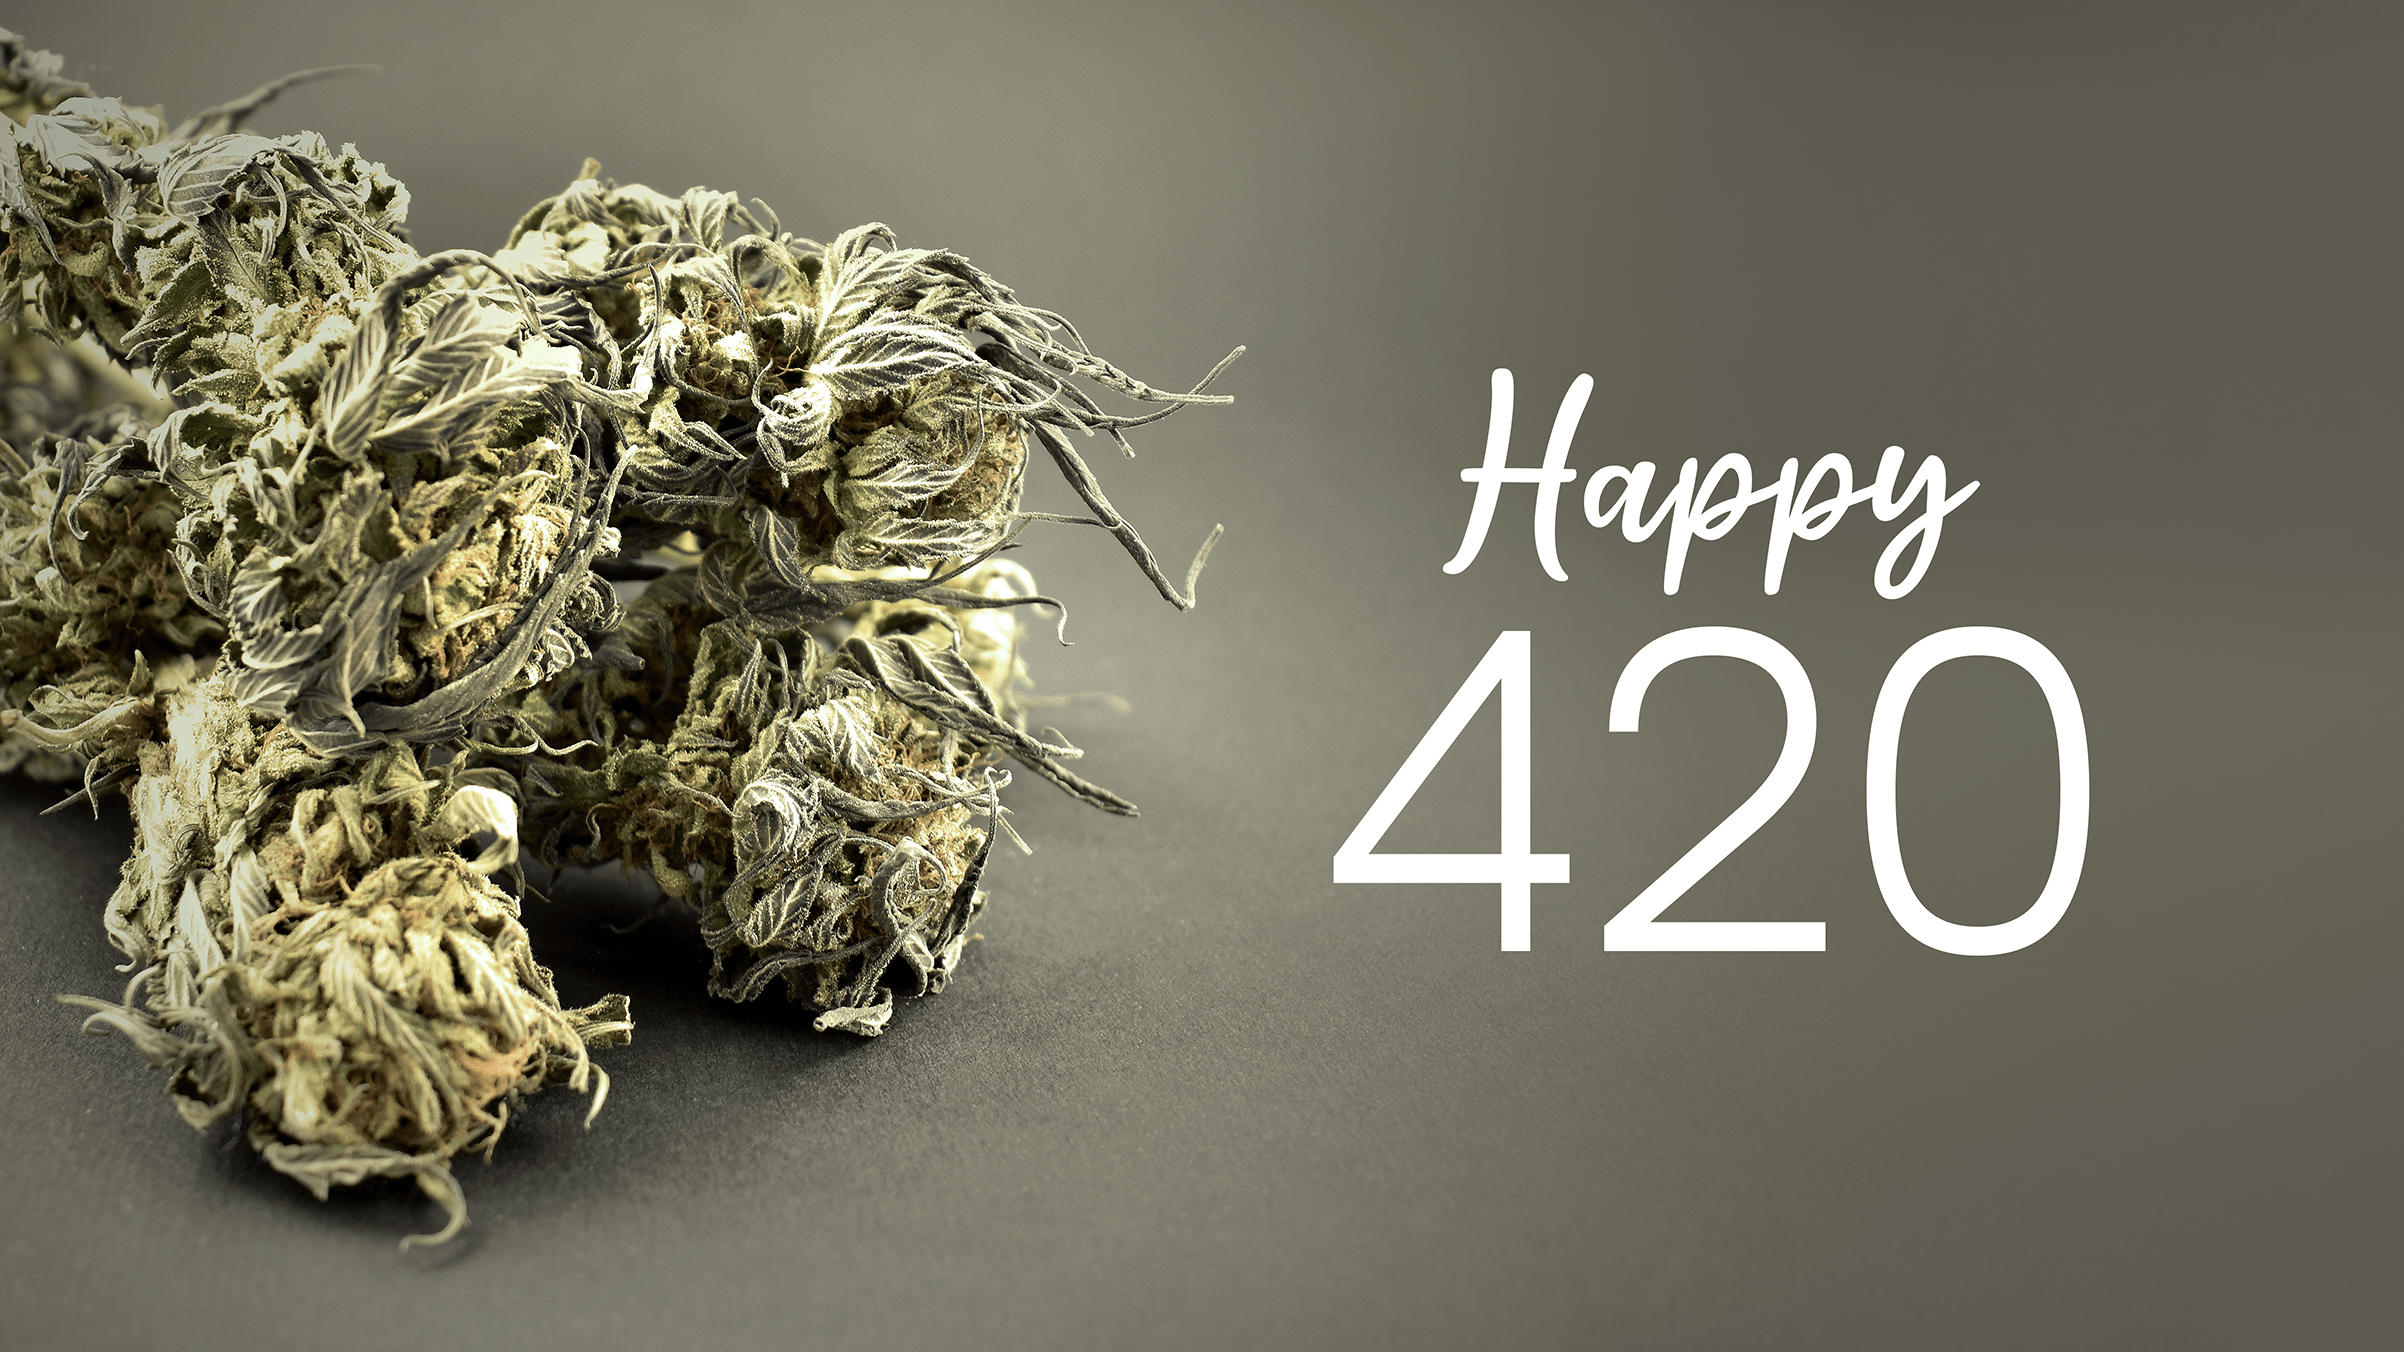 National Weed Day 2019: What Does 420 Mean?